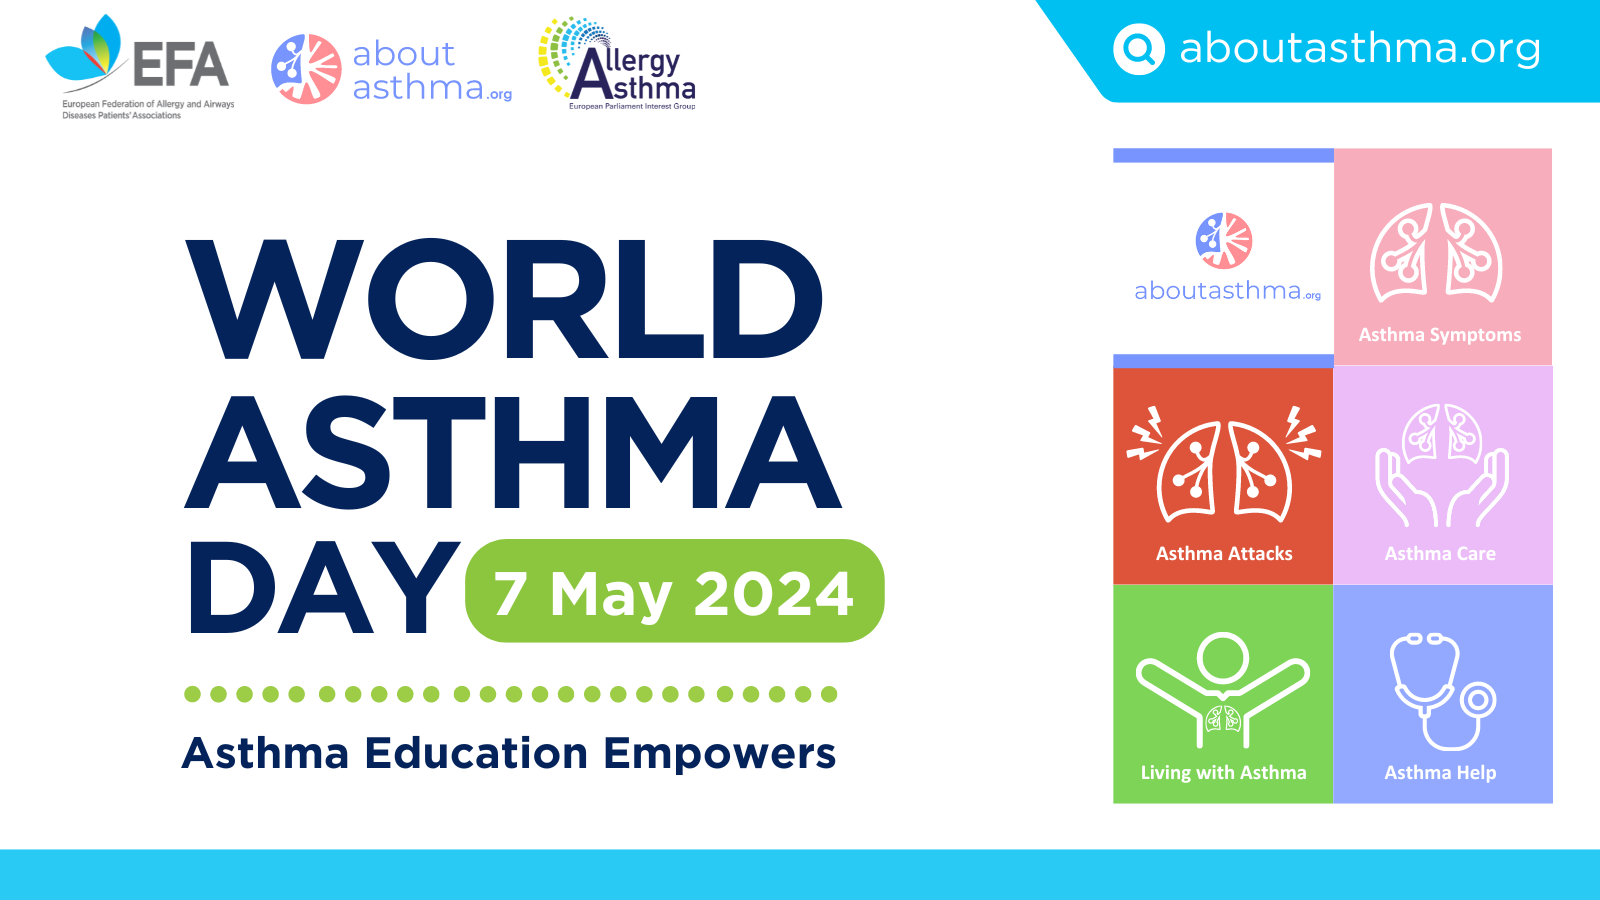 World Asthma Day 2024: AboutAsthma.org is now translated in 3 new languages – French, Spanish and Italian